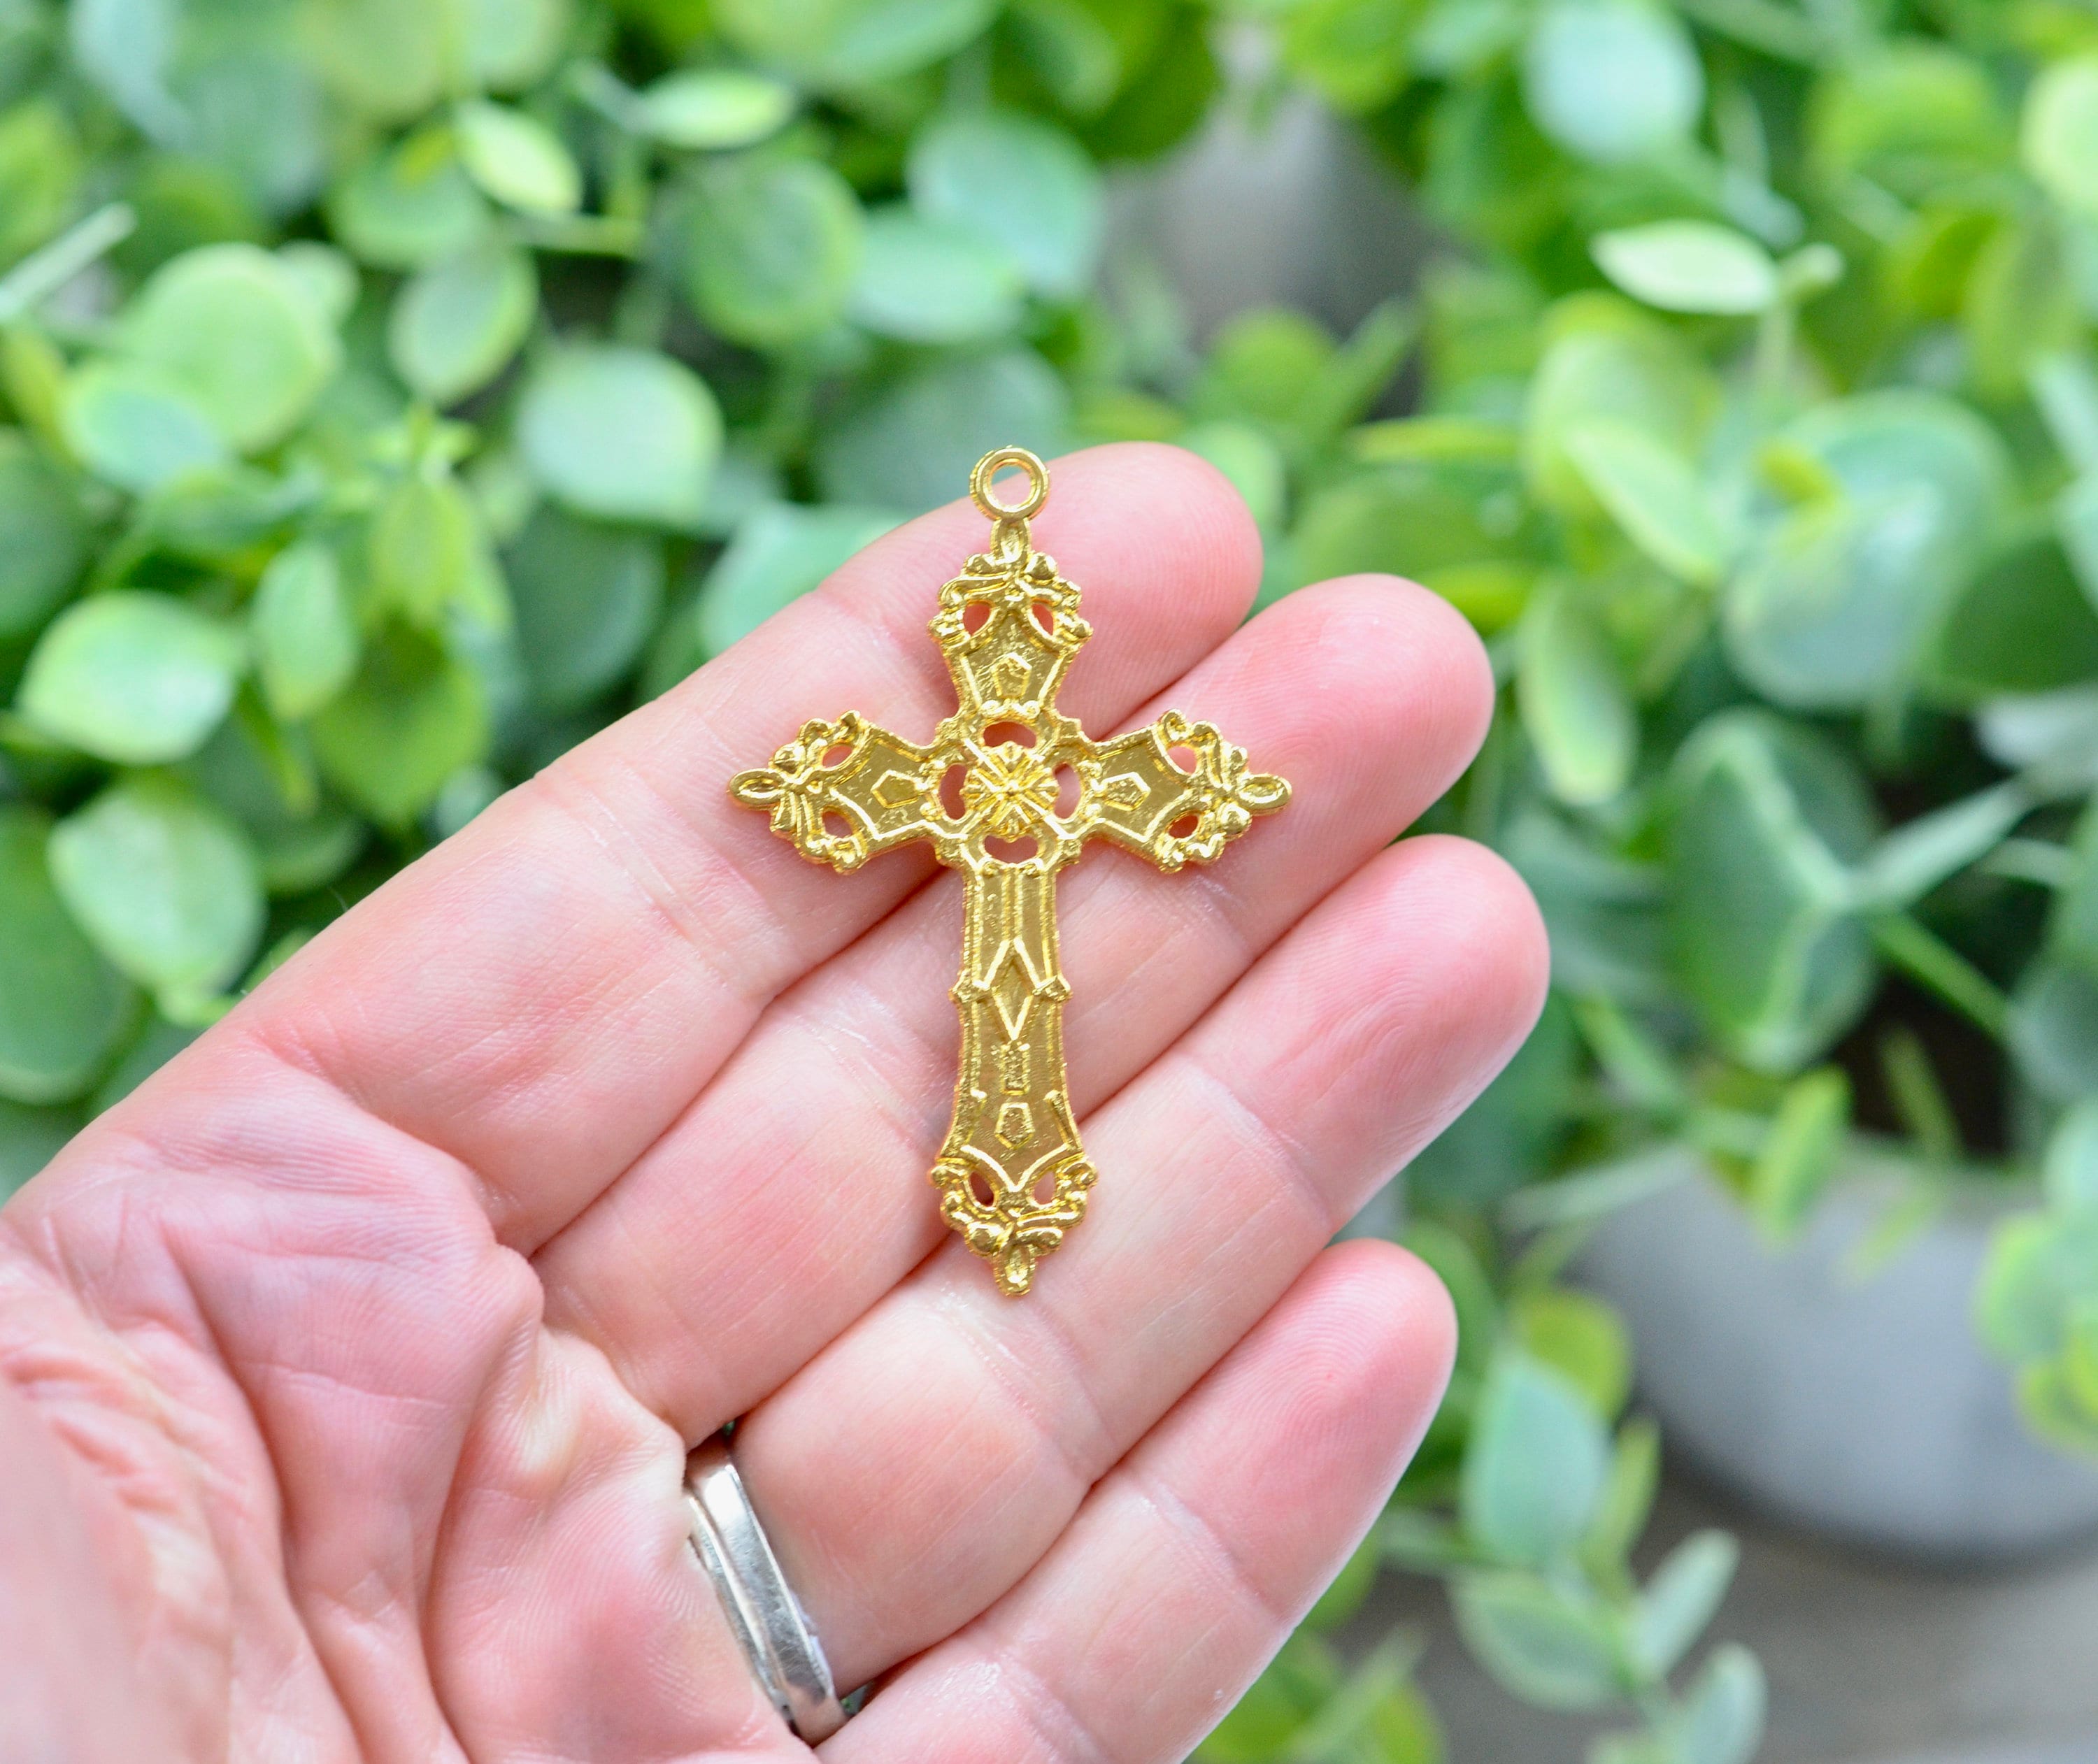 Gold Ornate Cross - Embroidered Iron on Patch